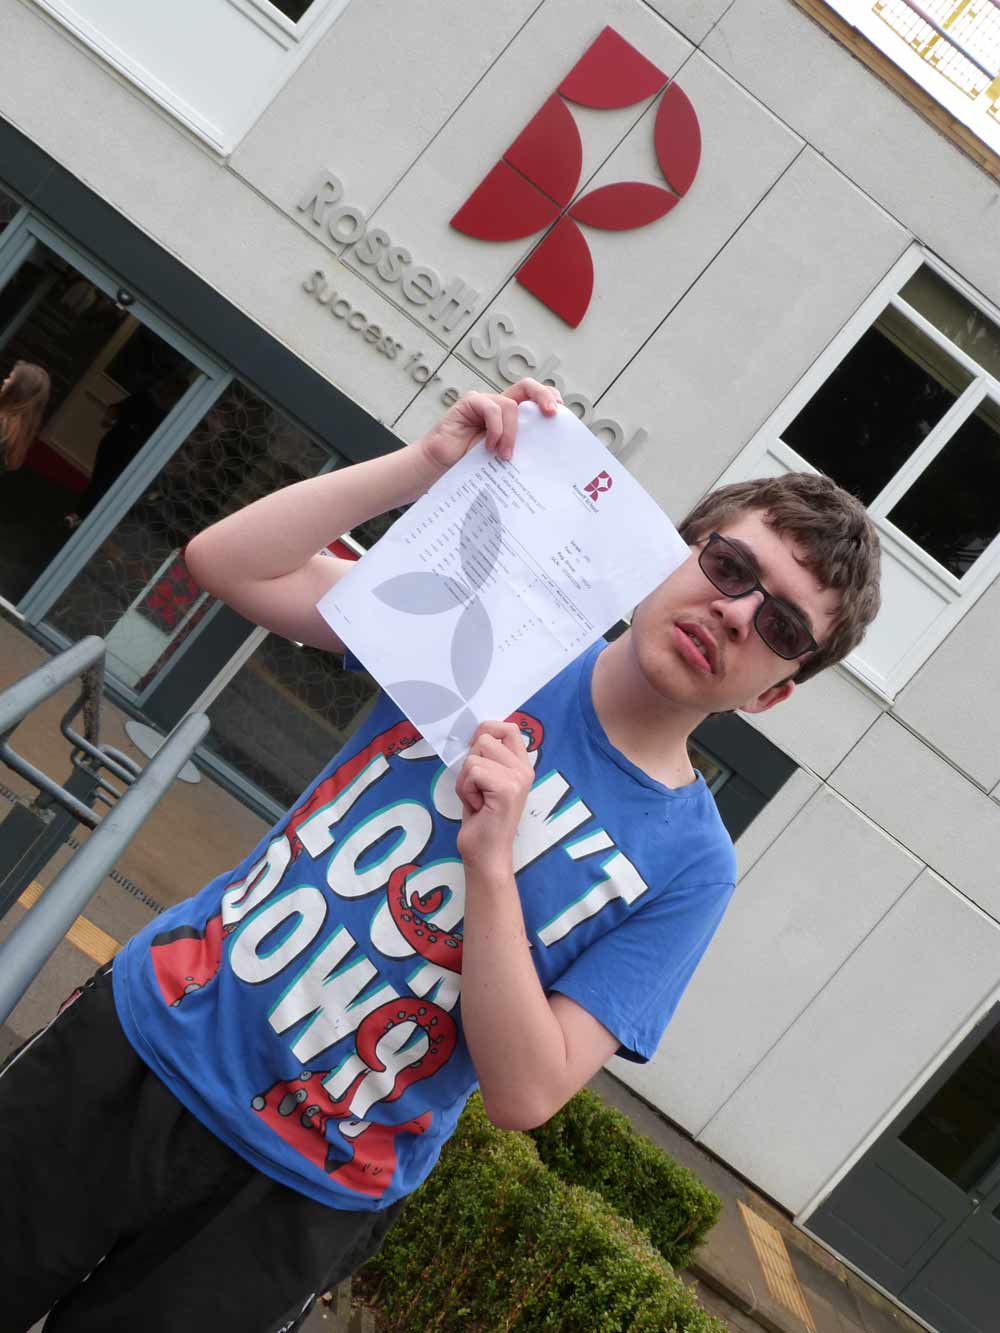 Callum Downs has achieved AAB grades in his A levels, despite facing medical conditions and operations while he was studying at Rossett School